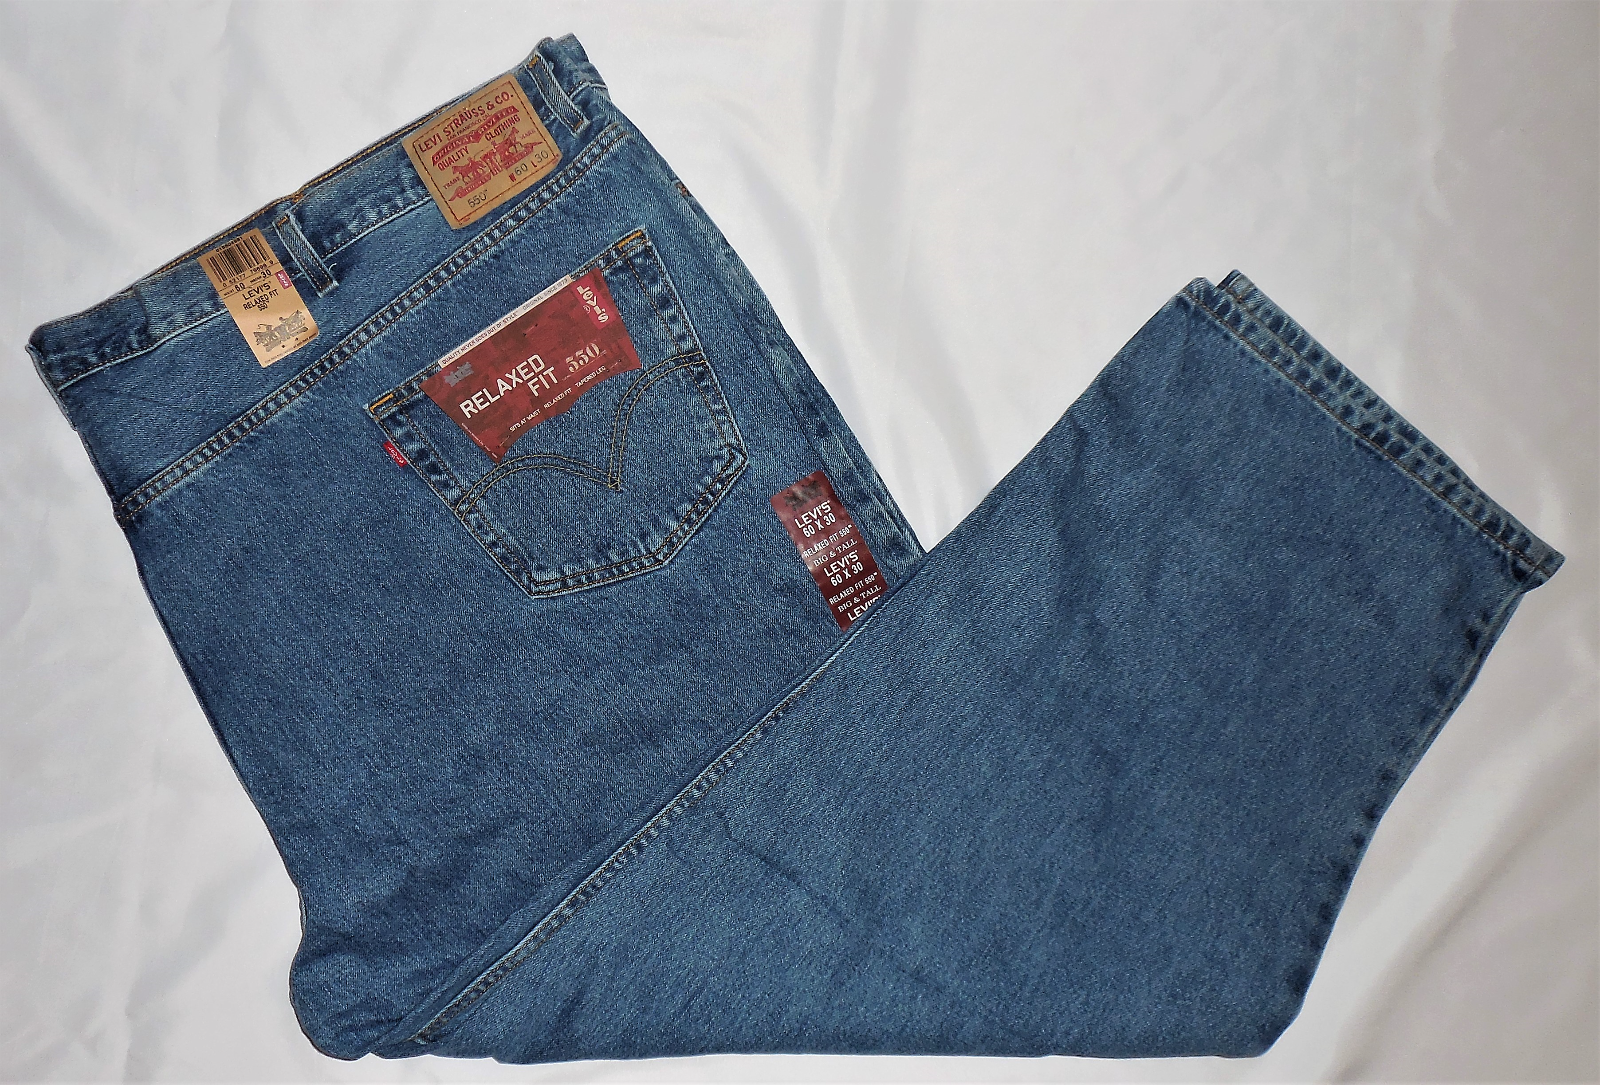 levi's men's big and tall 550 relaxed fit jean